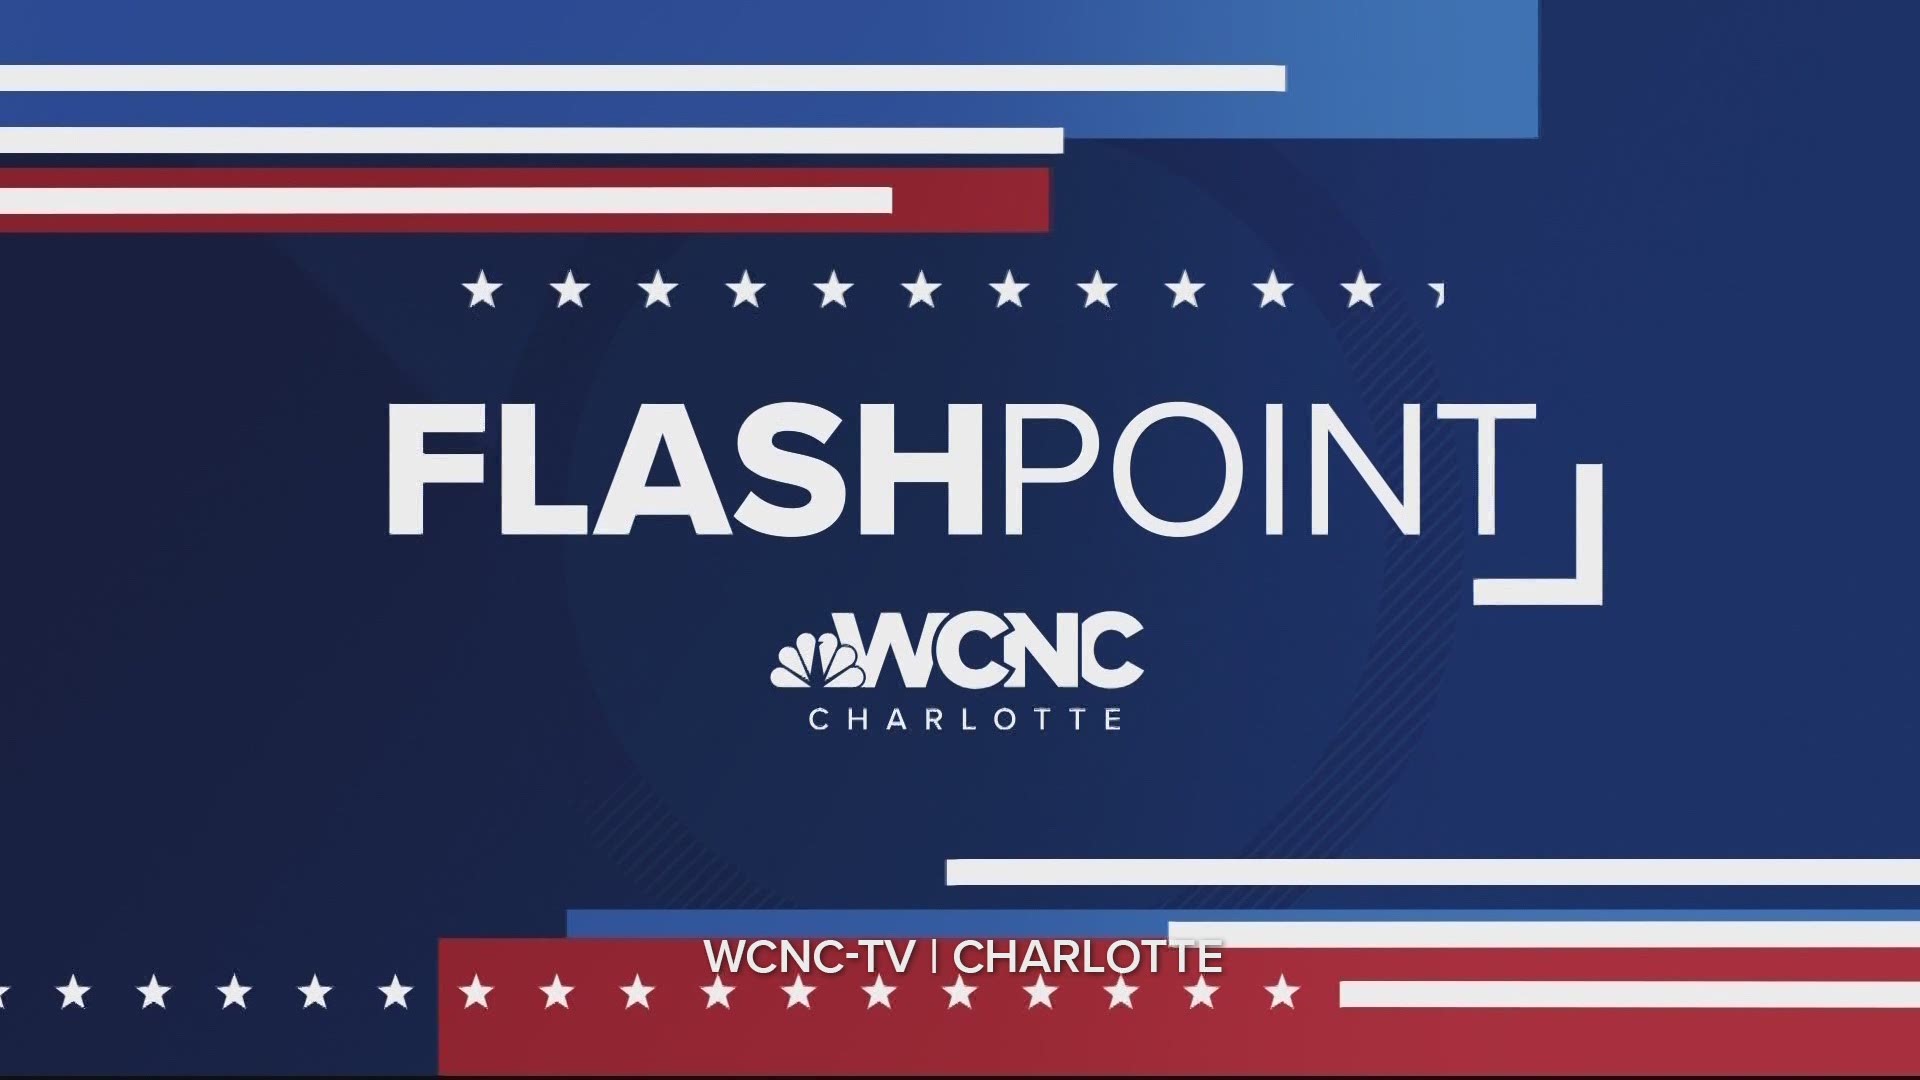 Flashpoint 12/20: March 3 NC reported its first COVID-19 case, now the state is seeing 6,000 to 7,000 cases a day.